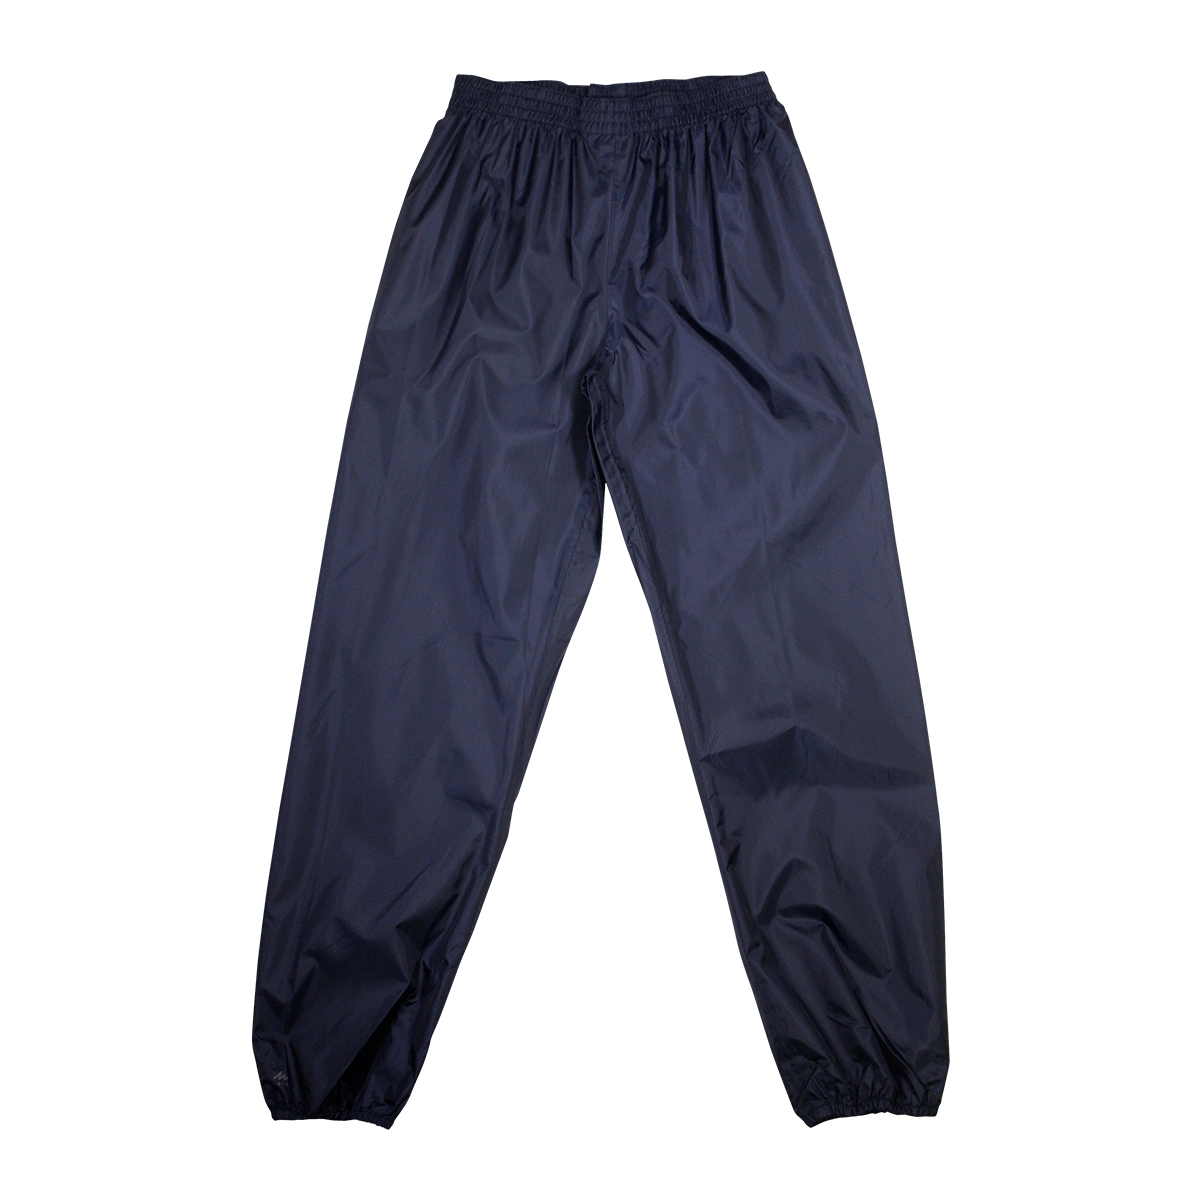 Wed'ze by Decathlon Boy's Navy Blue Water-Repellant Pants (S04)